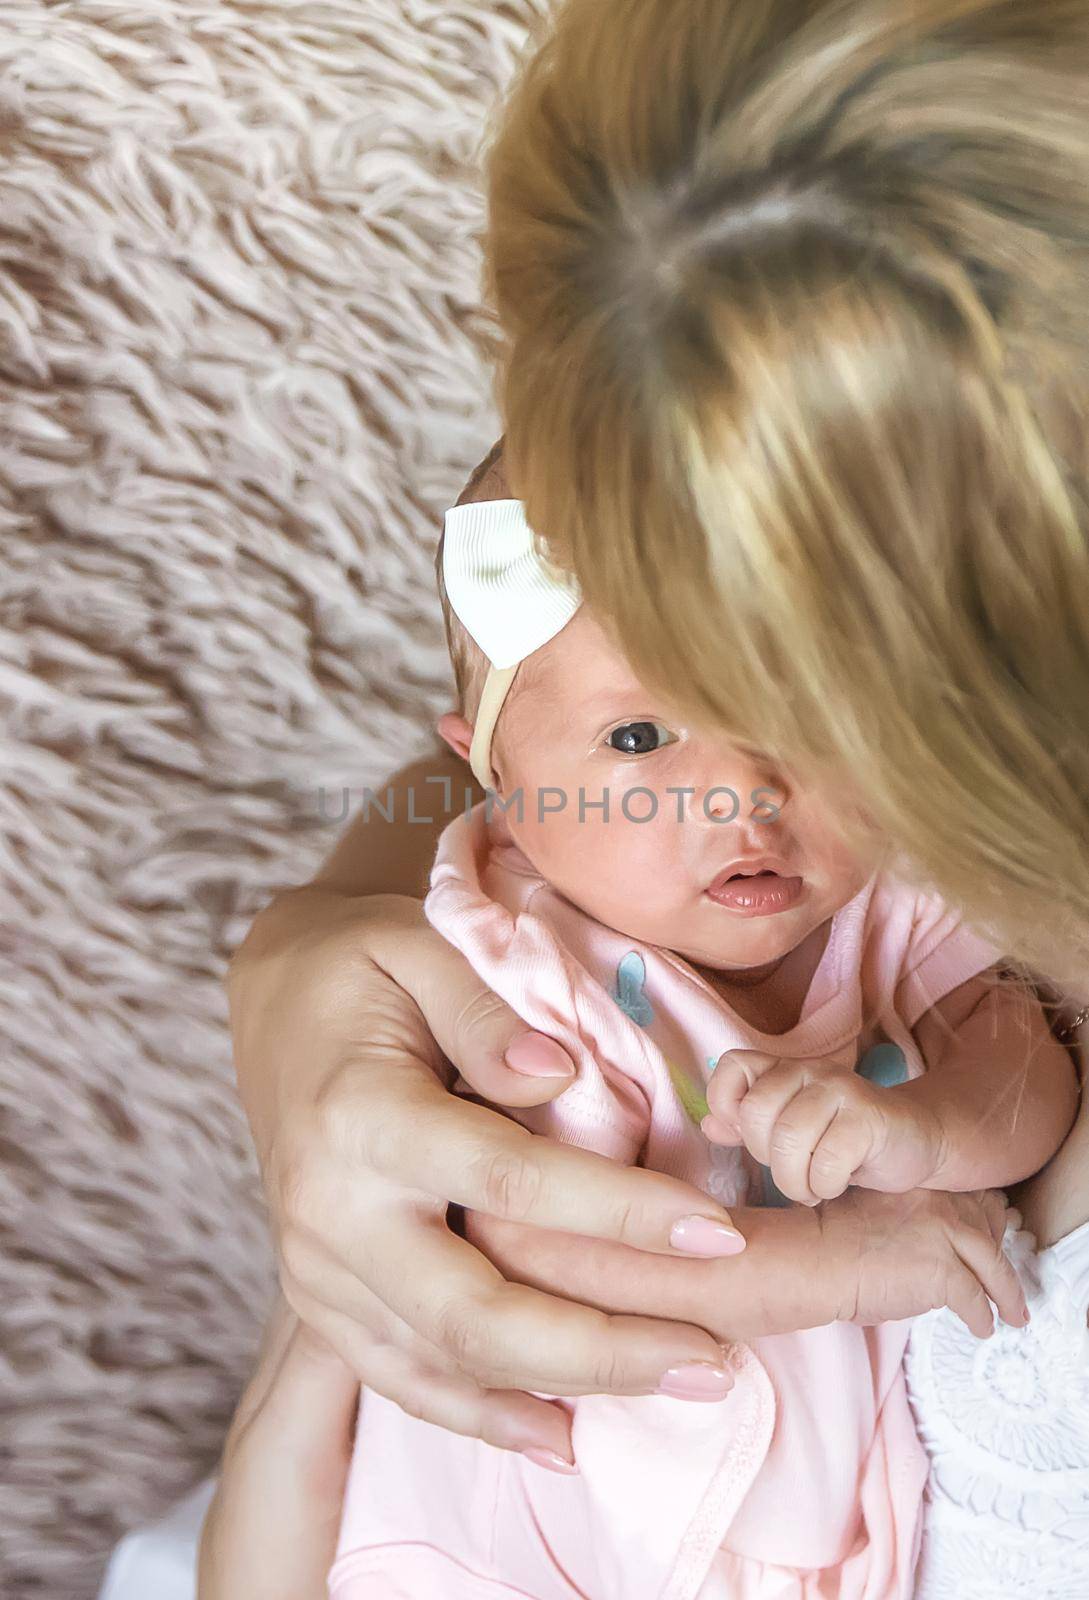 newborn baby in mother's arms. selective focus. people.